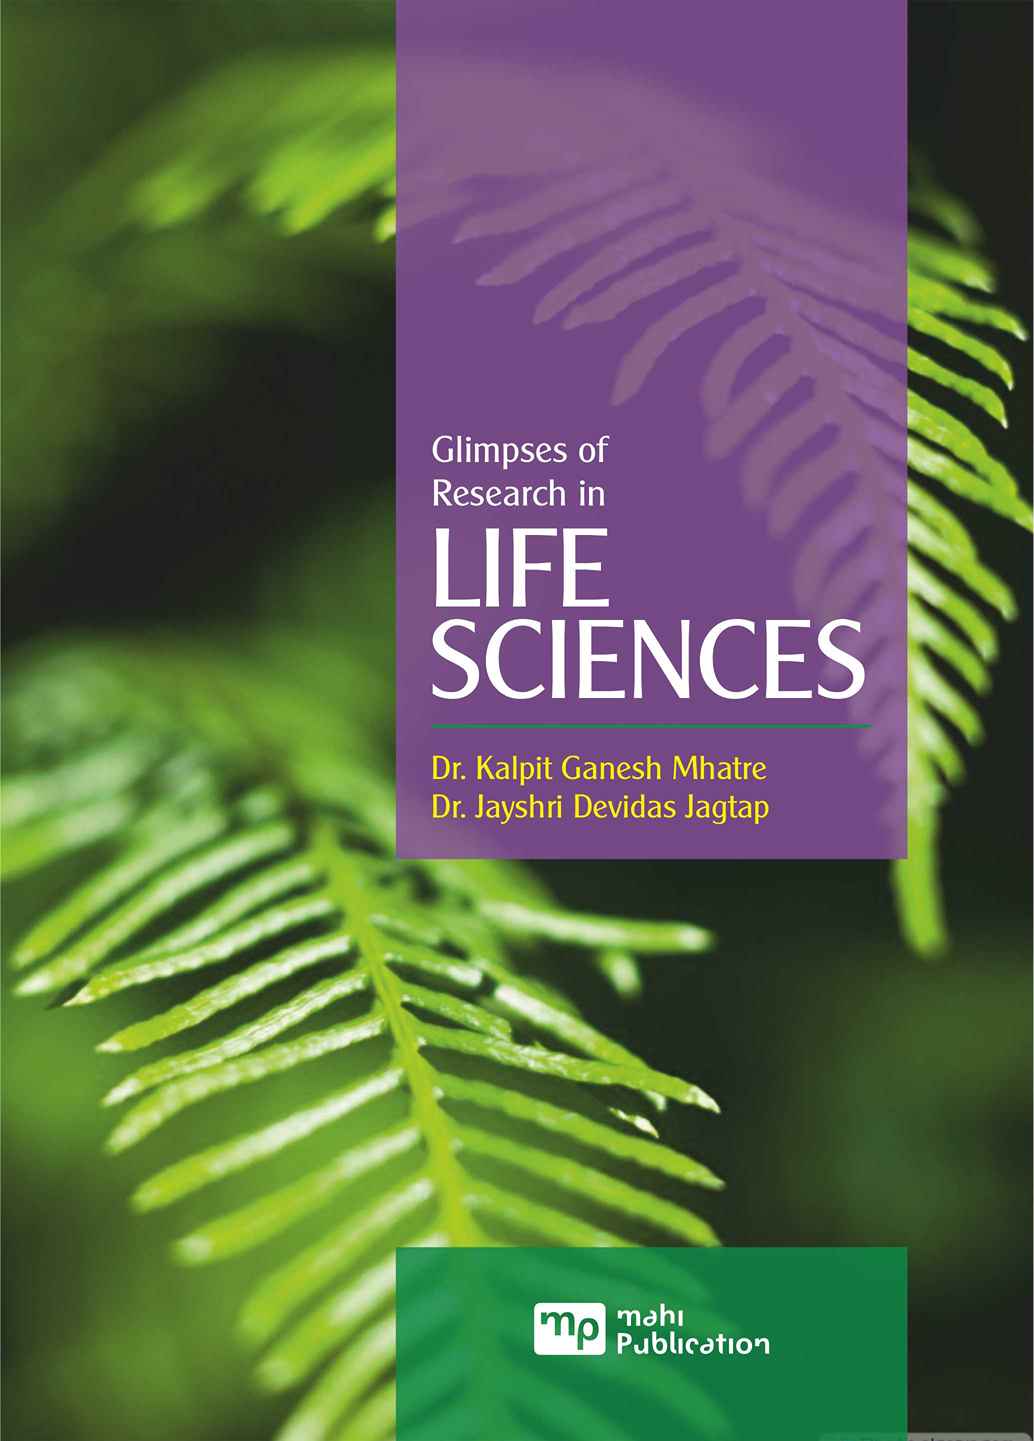 Glimpses of Research in Life Sciences